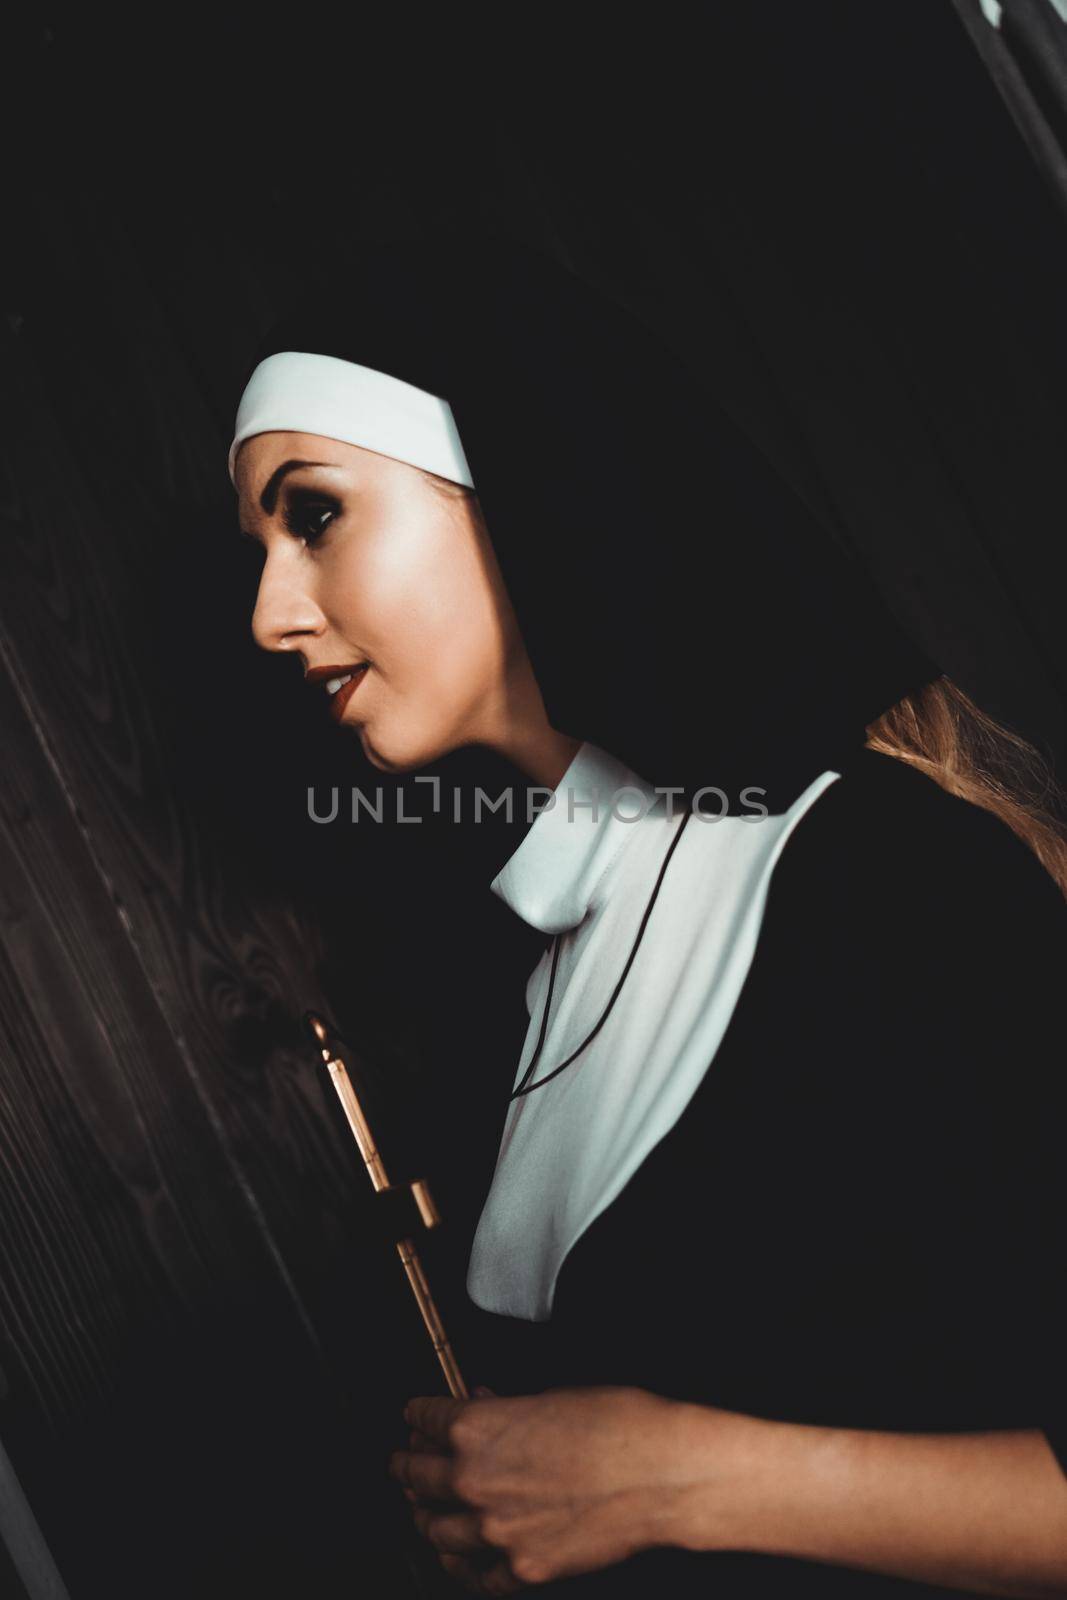 Sexy nun prays indoor. Beautiful young holy sister. by natali_brill